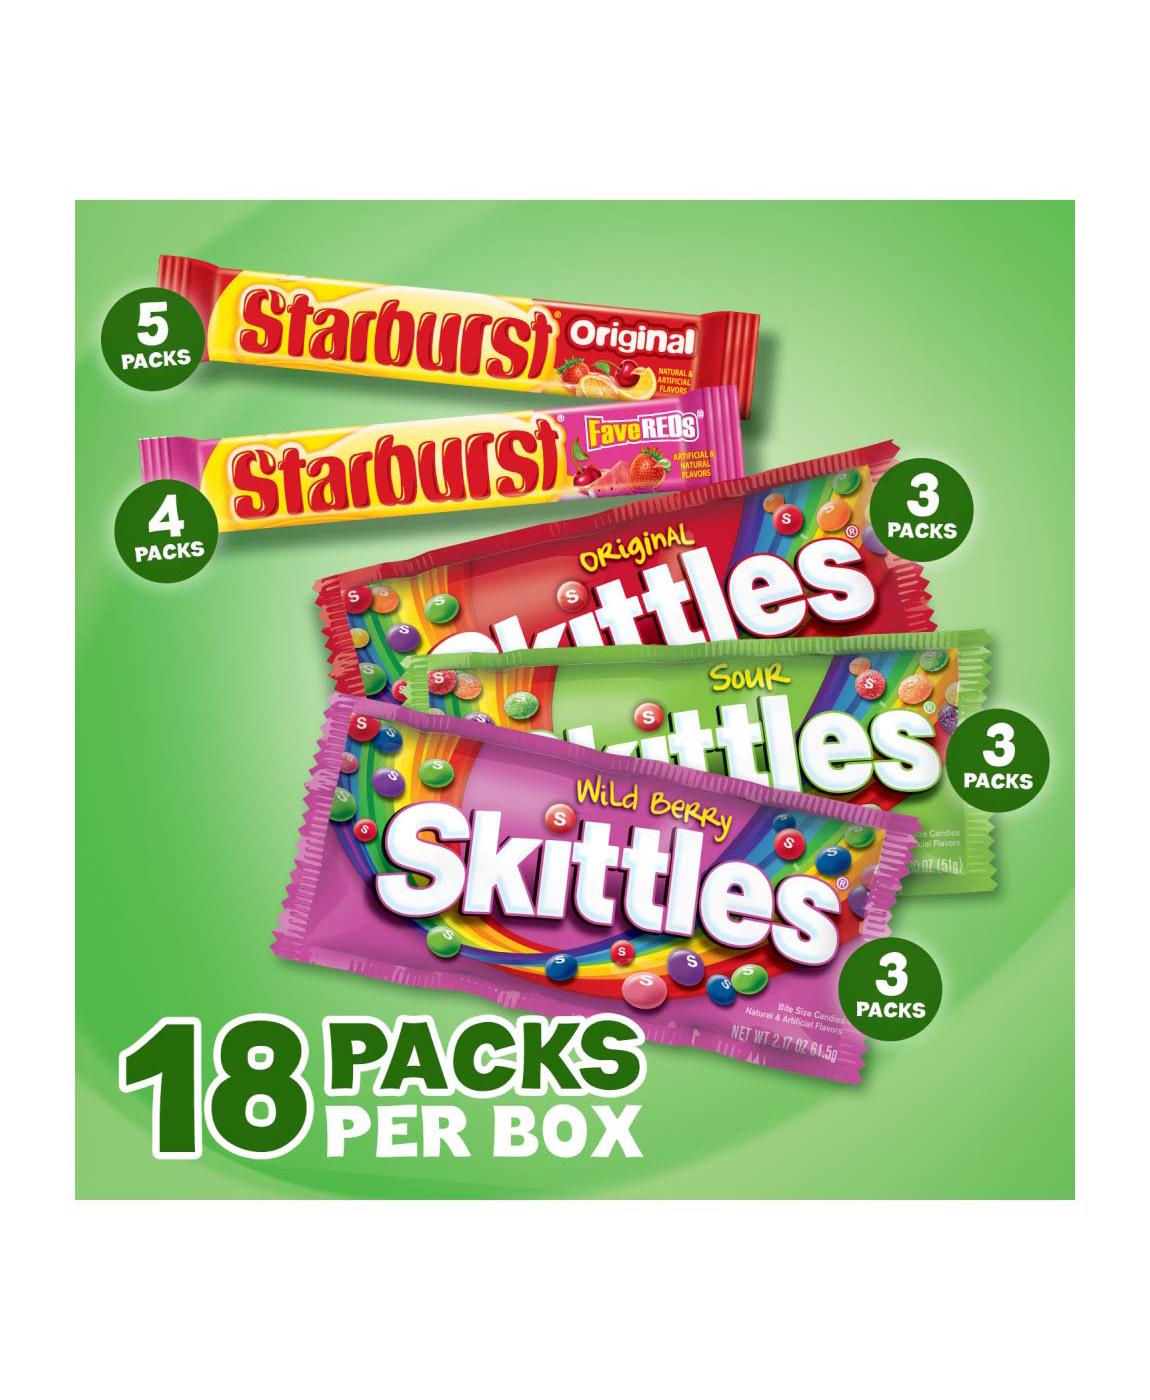 Skittles & Starburst Assorted Chewy Candy - Variety Pack; image 12 of 12